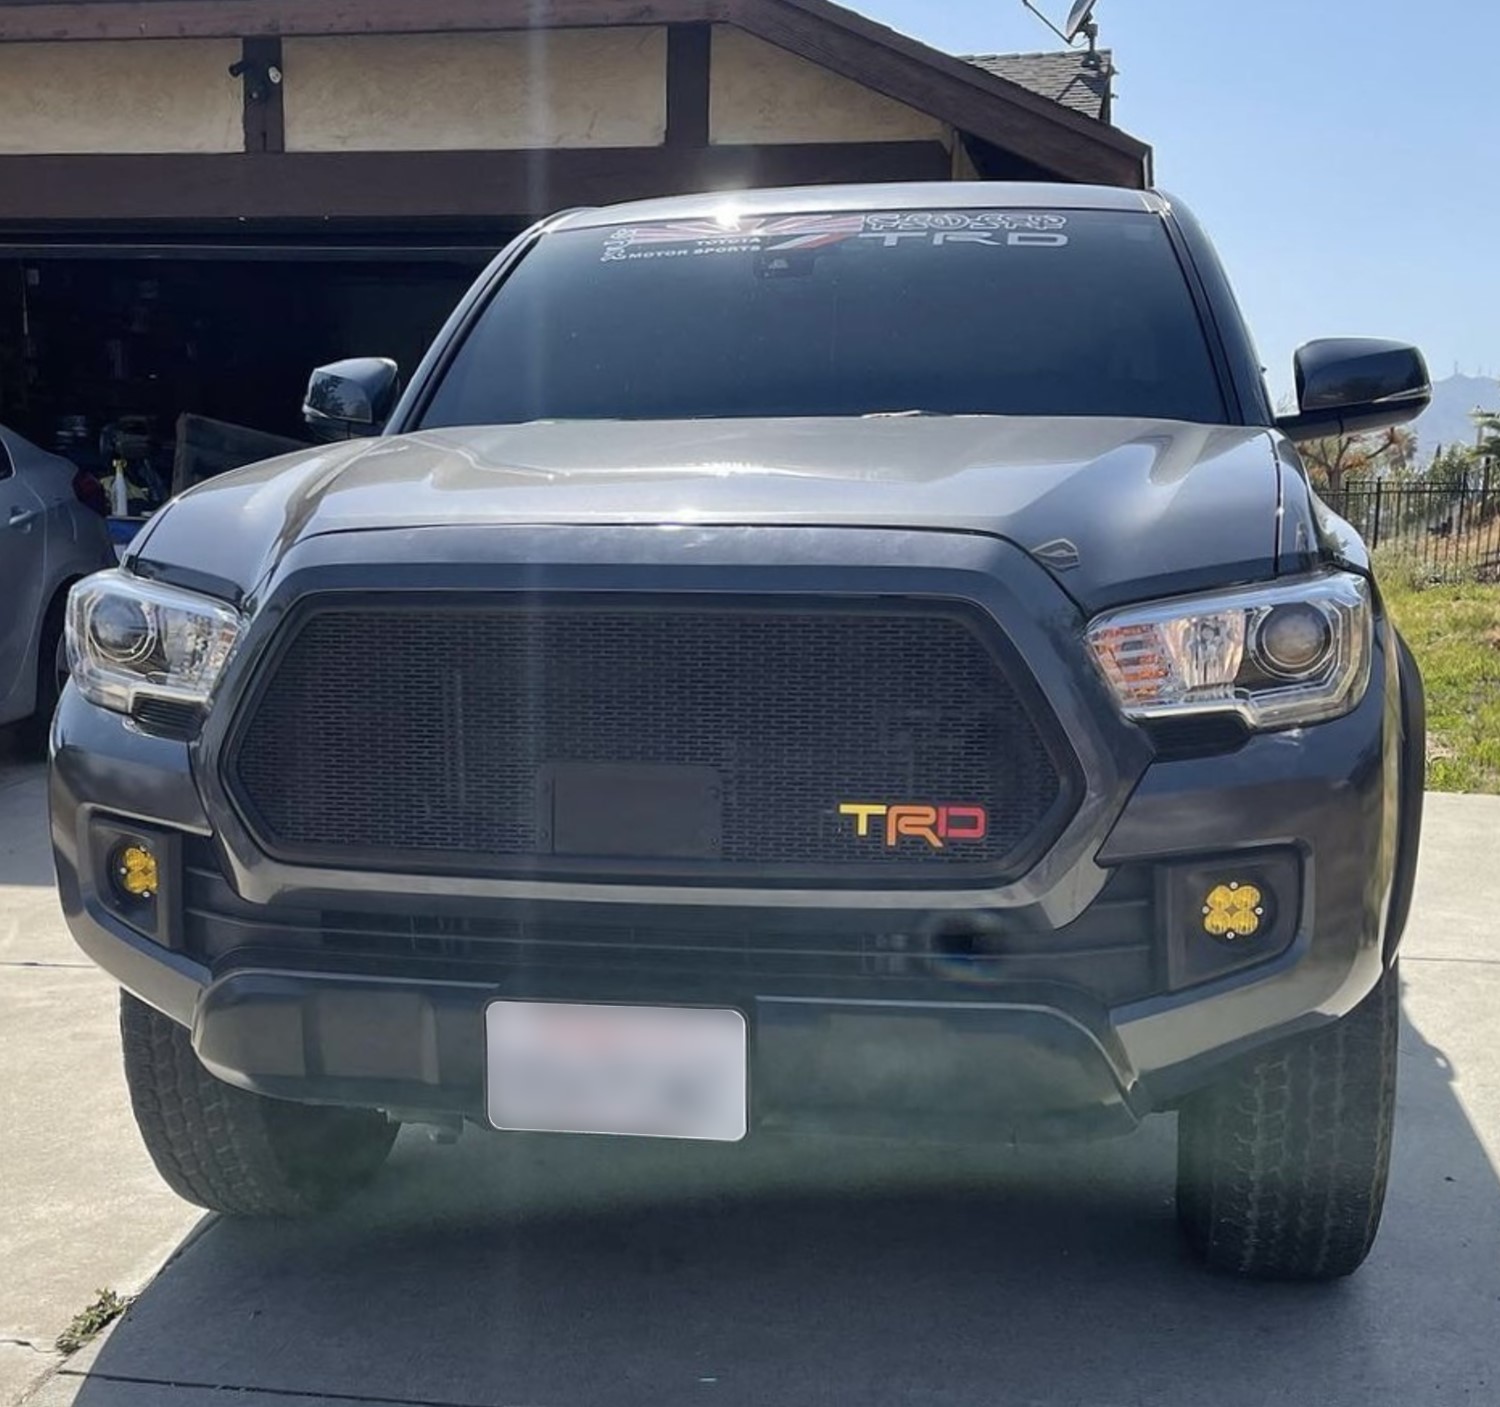 Customize Your Tacoma: Add a Colorful TRD Emblem to Your Grille!